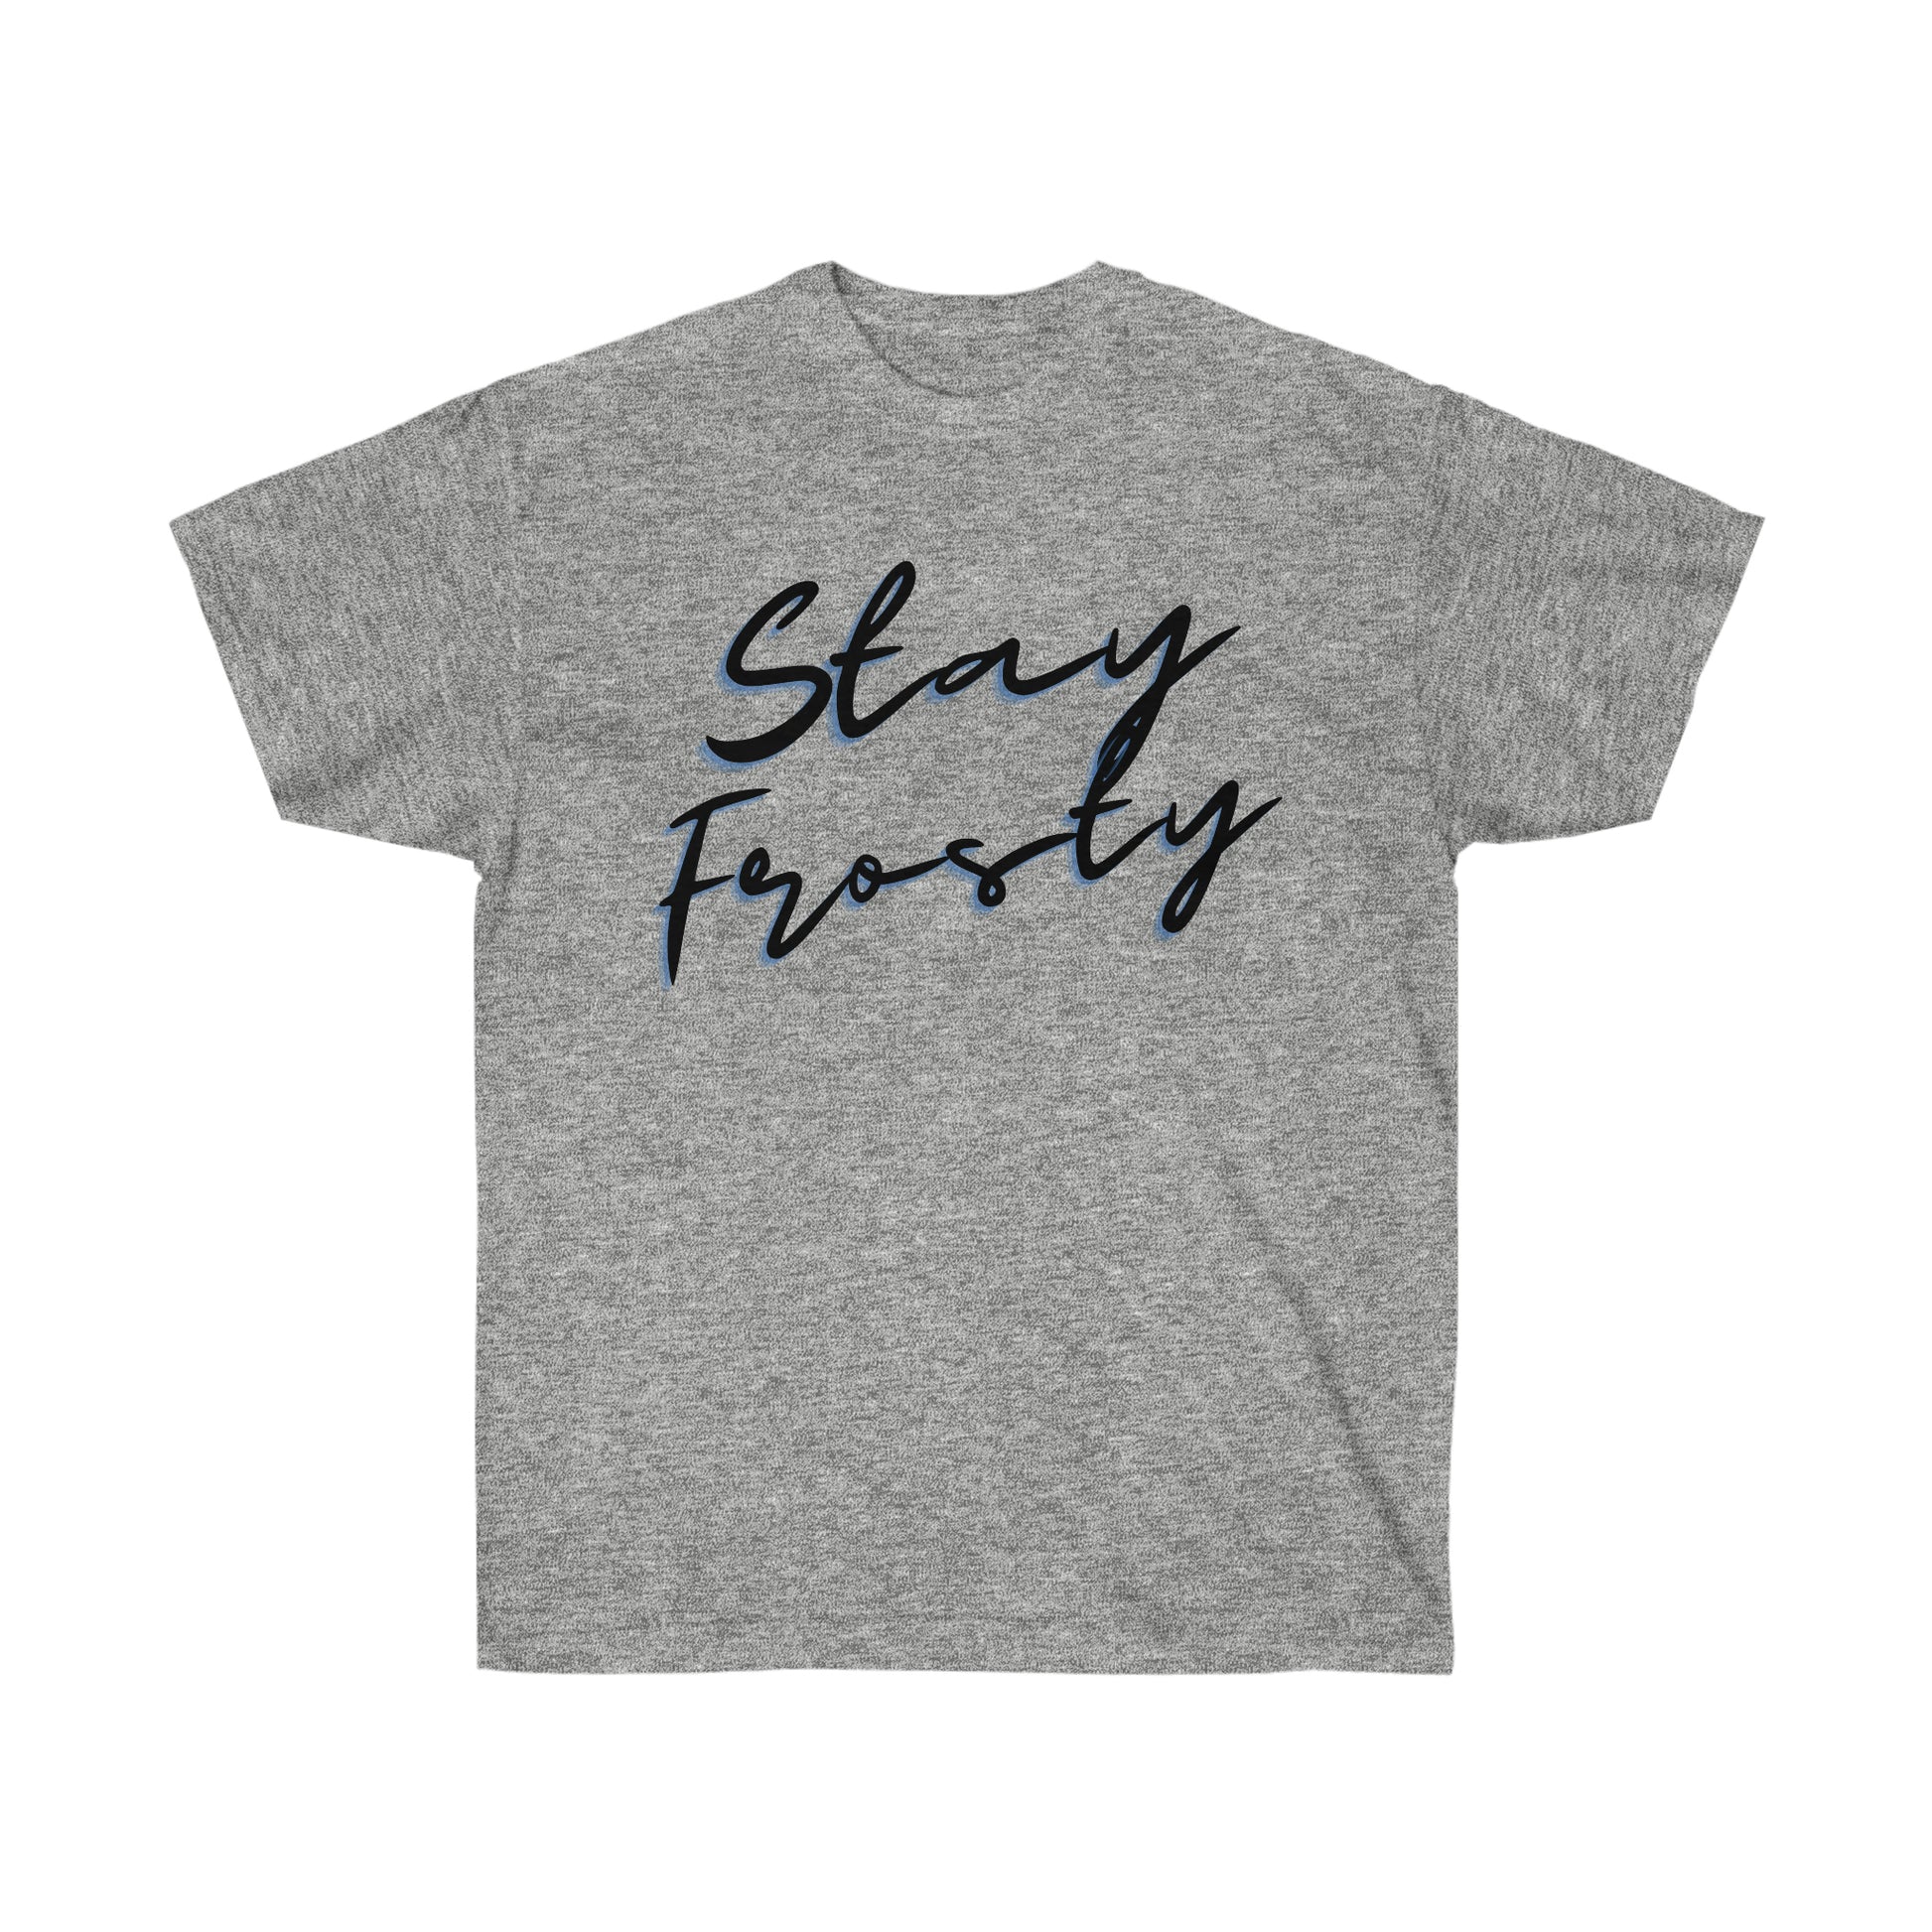 Stay Frosty Weed T-Shirt.